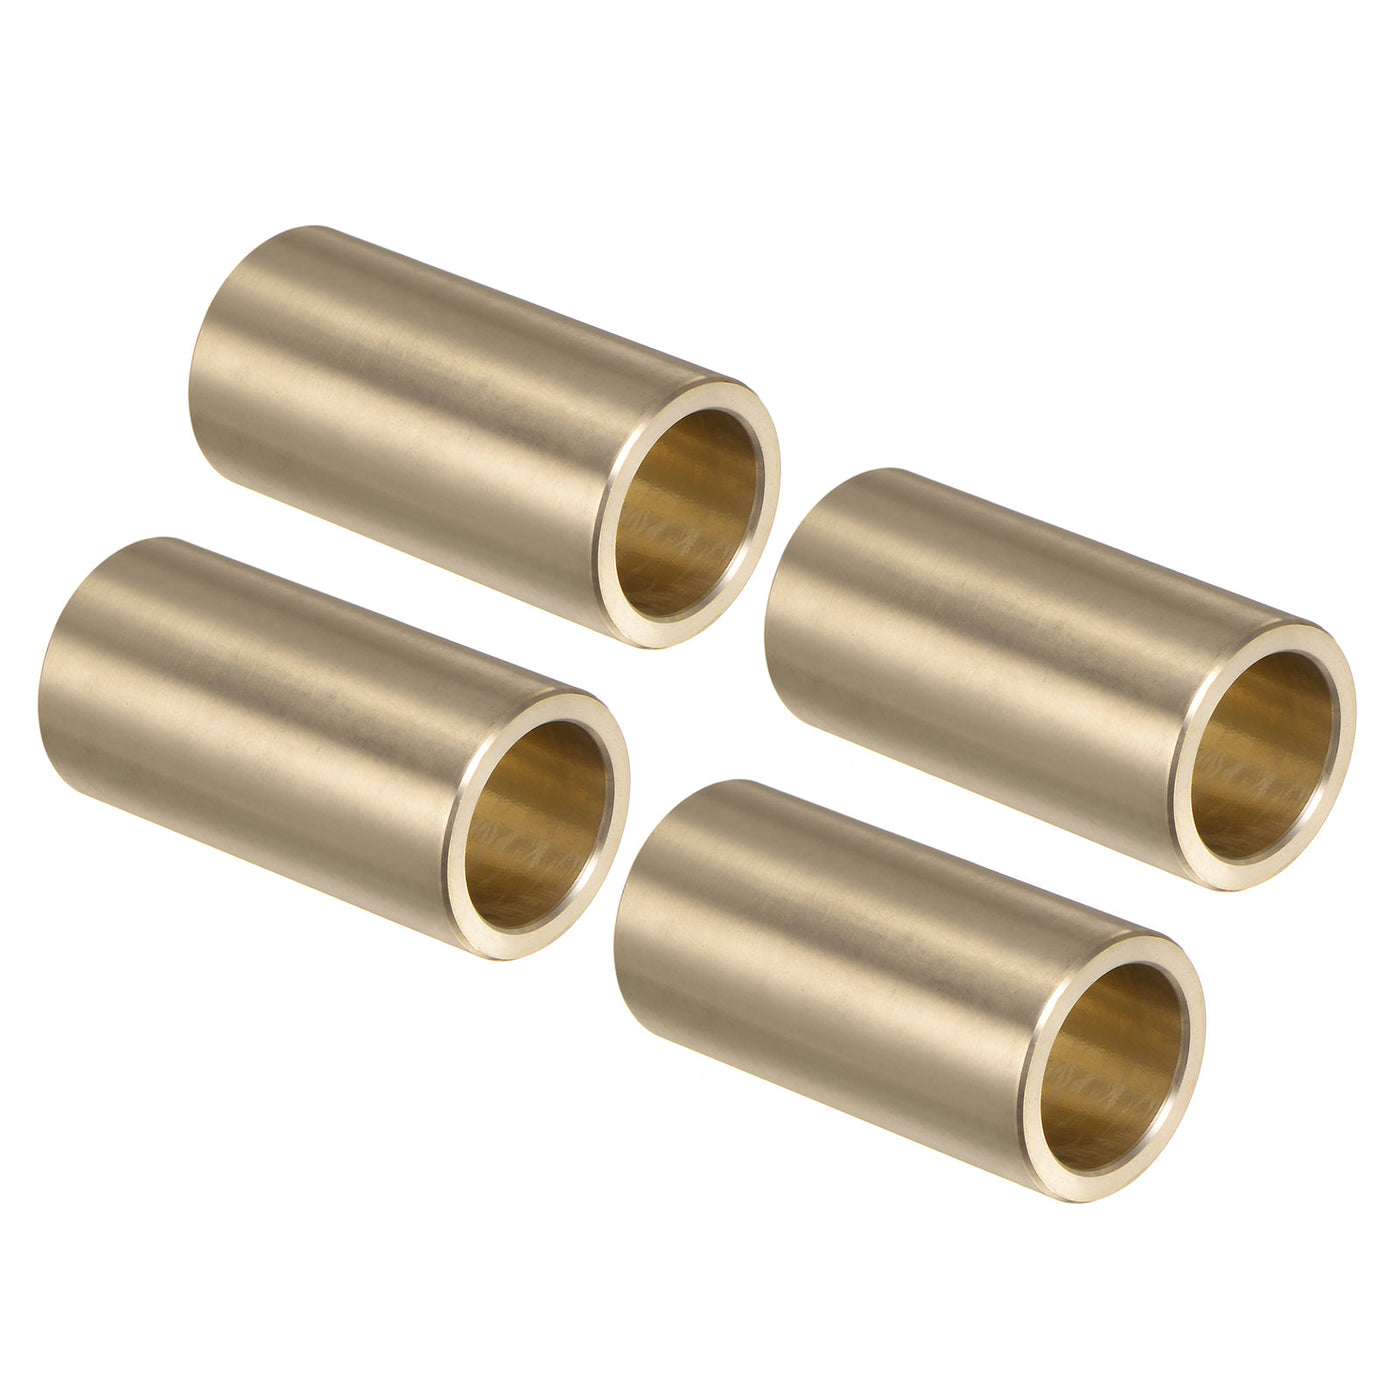 uxcell Uxcell 4pcs Sleeve Bearings 3/4" x 1" x 2" Wrapped Oilless Bushings Cast Brass